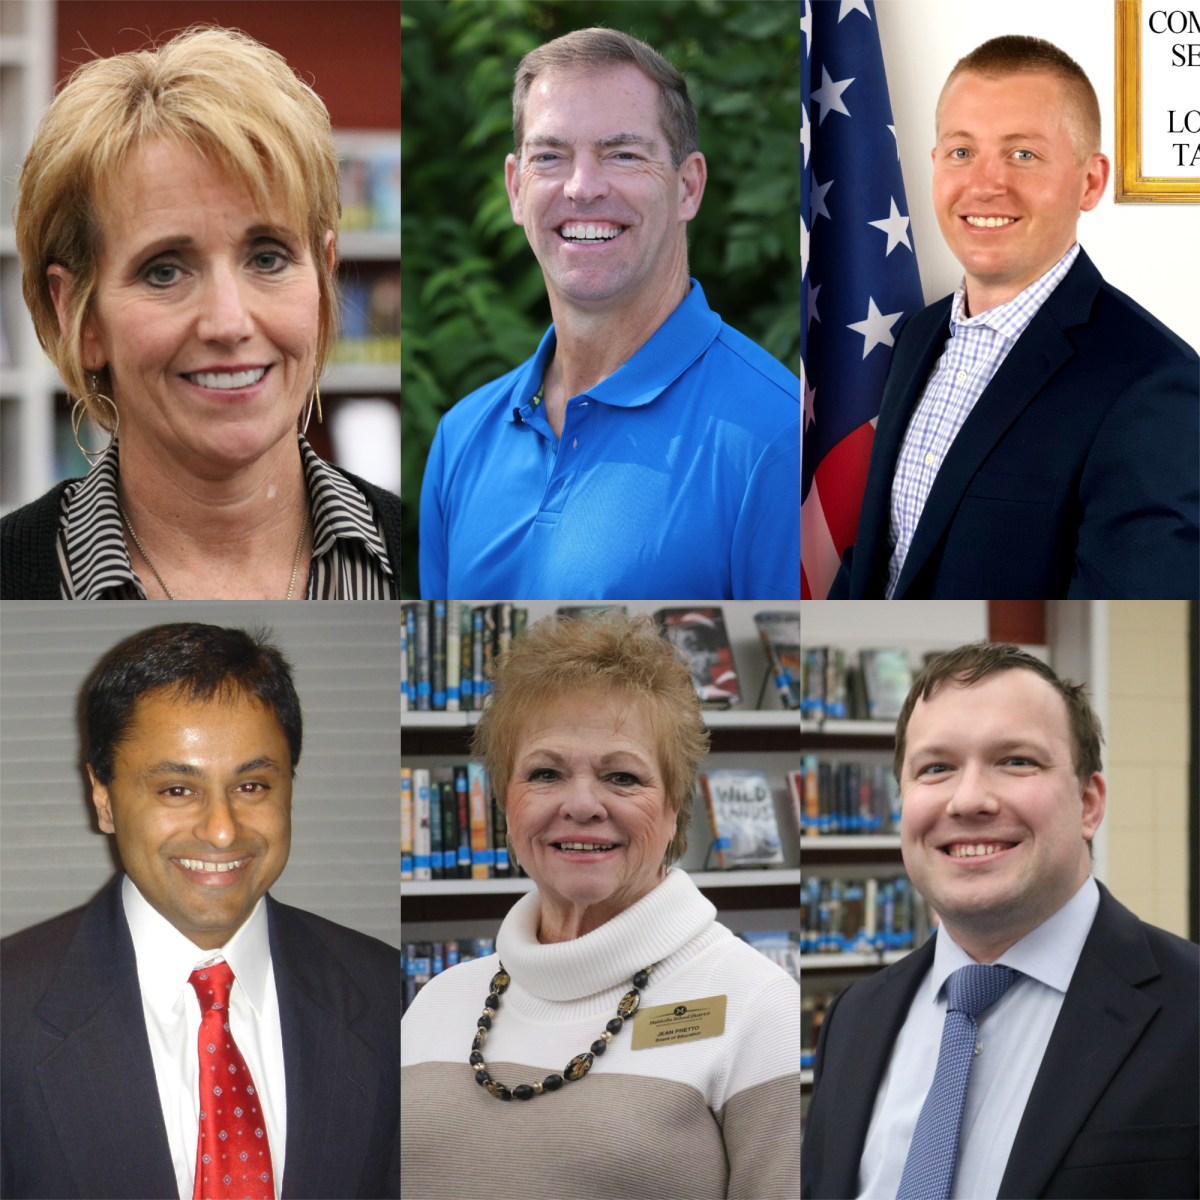 The six candidates running for the two two-year term seats on the Mehlville Board of Education. 

Top row, in alphabetical order from left: Incumbent Peggy Hassler, Bob Mahacek and Mike Moore. 

Bottom row, in alphabetical order from left: Venki Palamand, Incumbent Jean Pretto and Sasha Schmittgens.